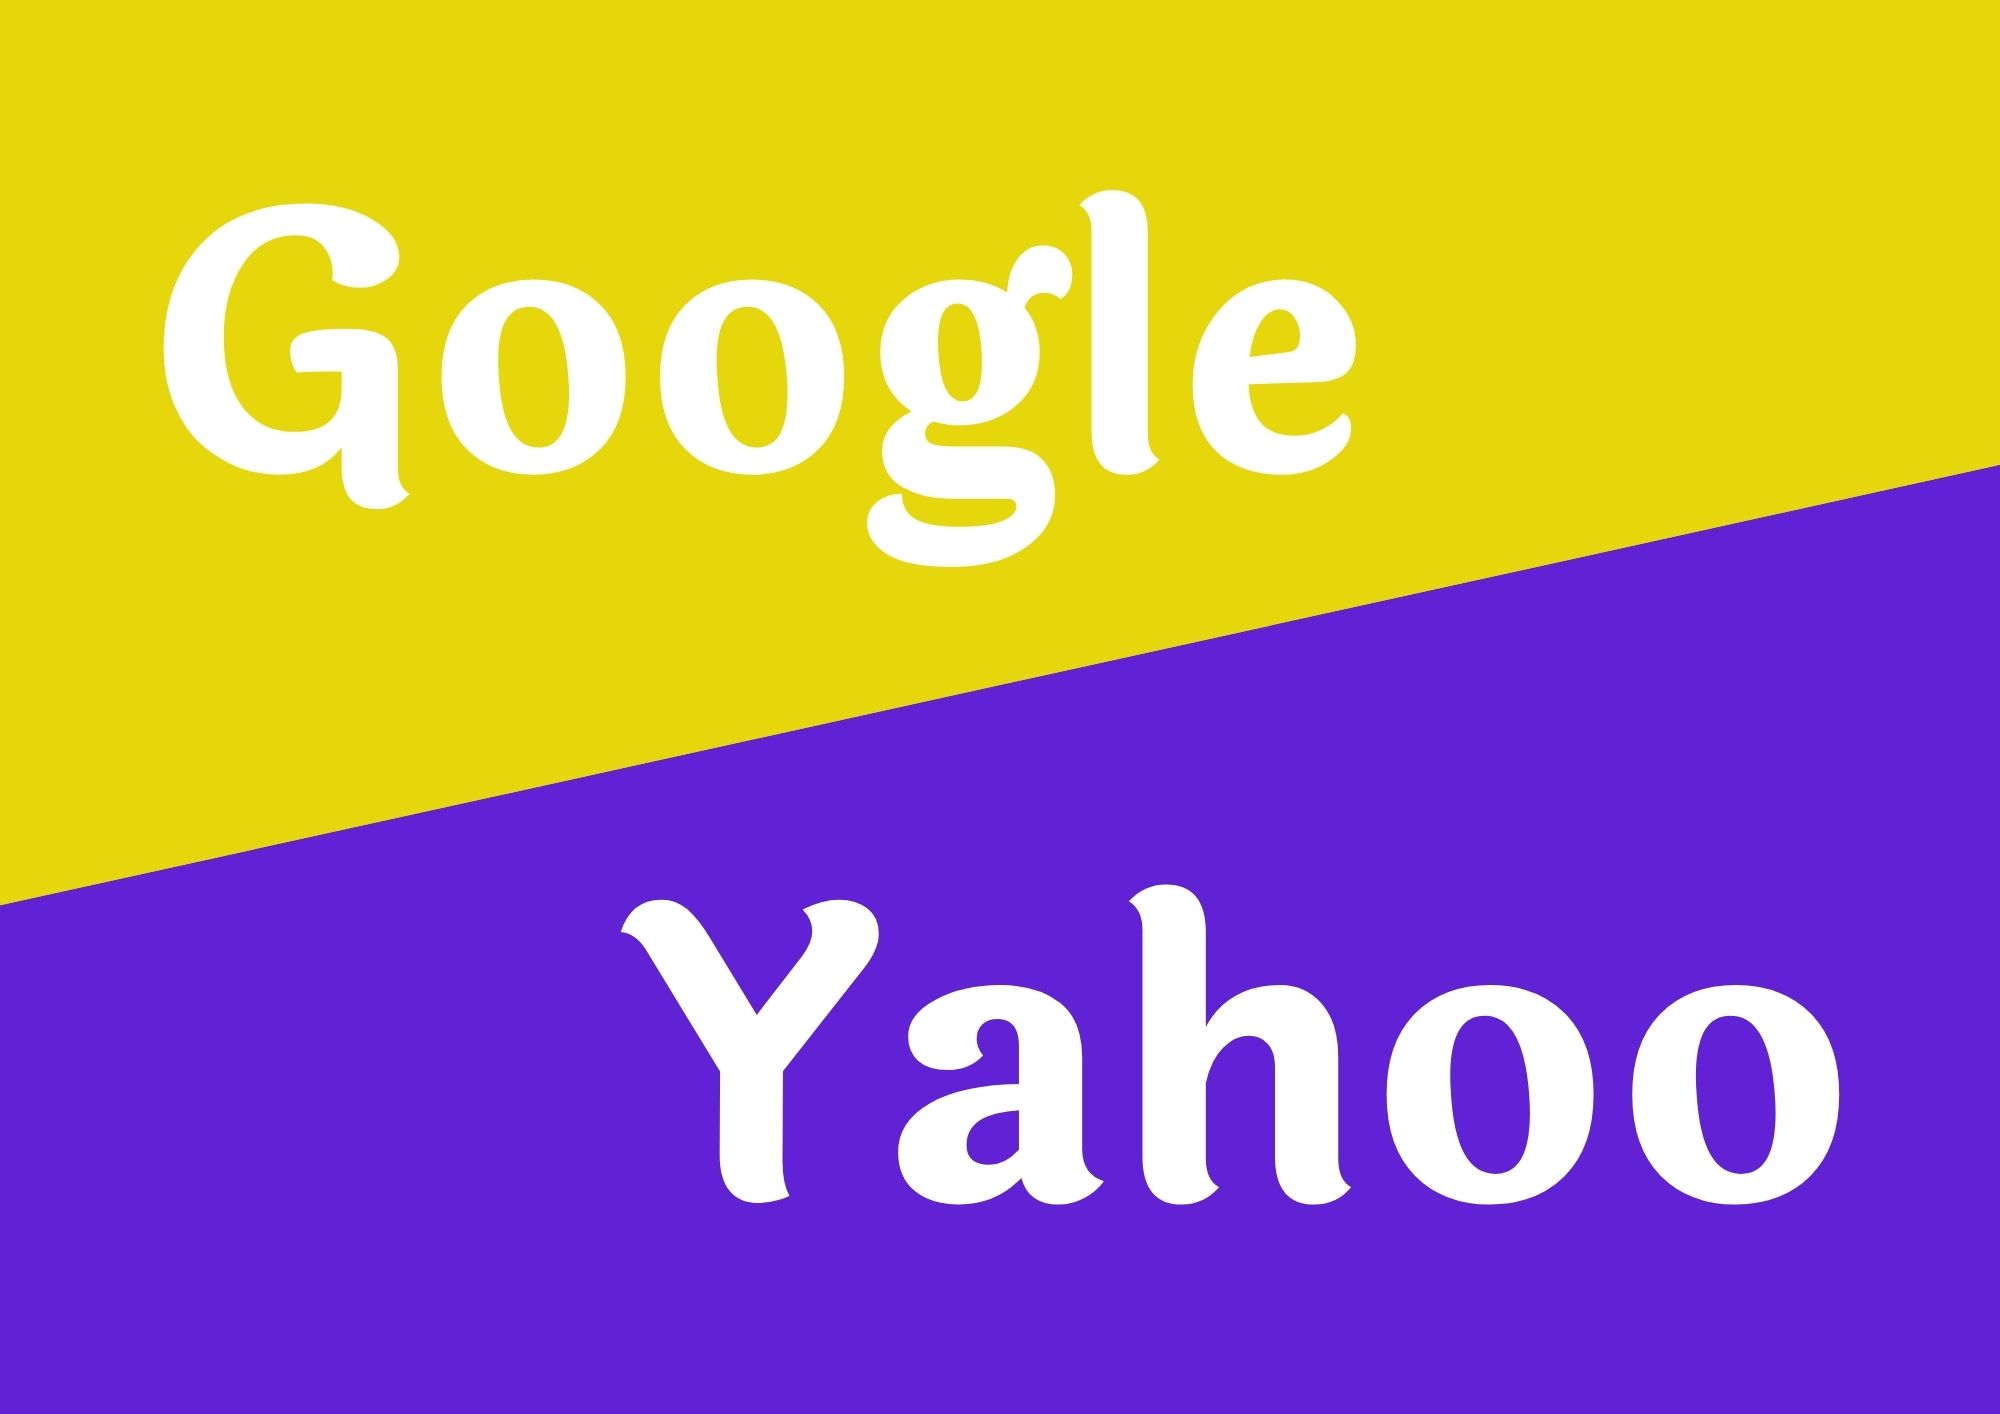 Full Form Of Yahoo And Google | Full Form Of Google And Yahoo